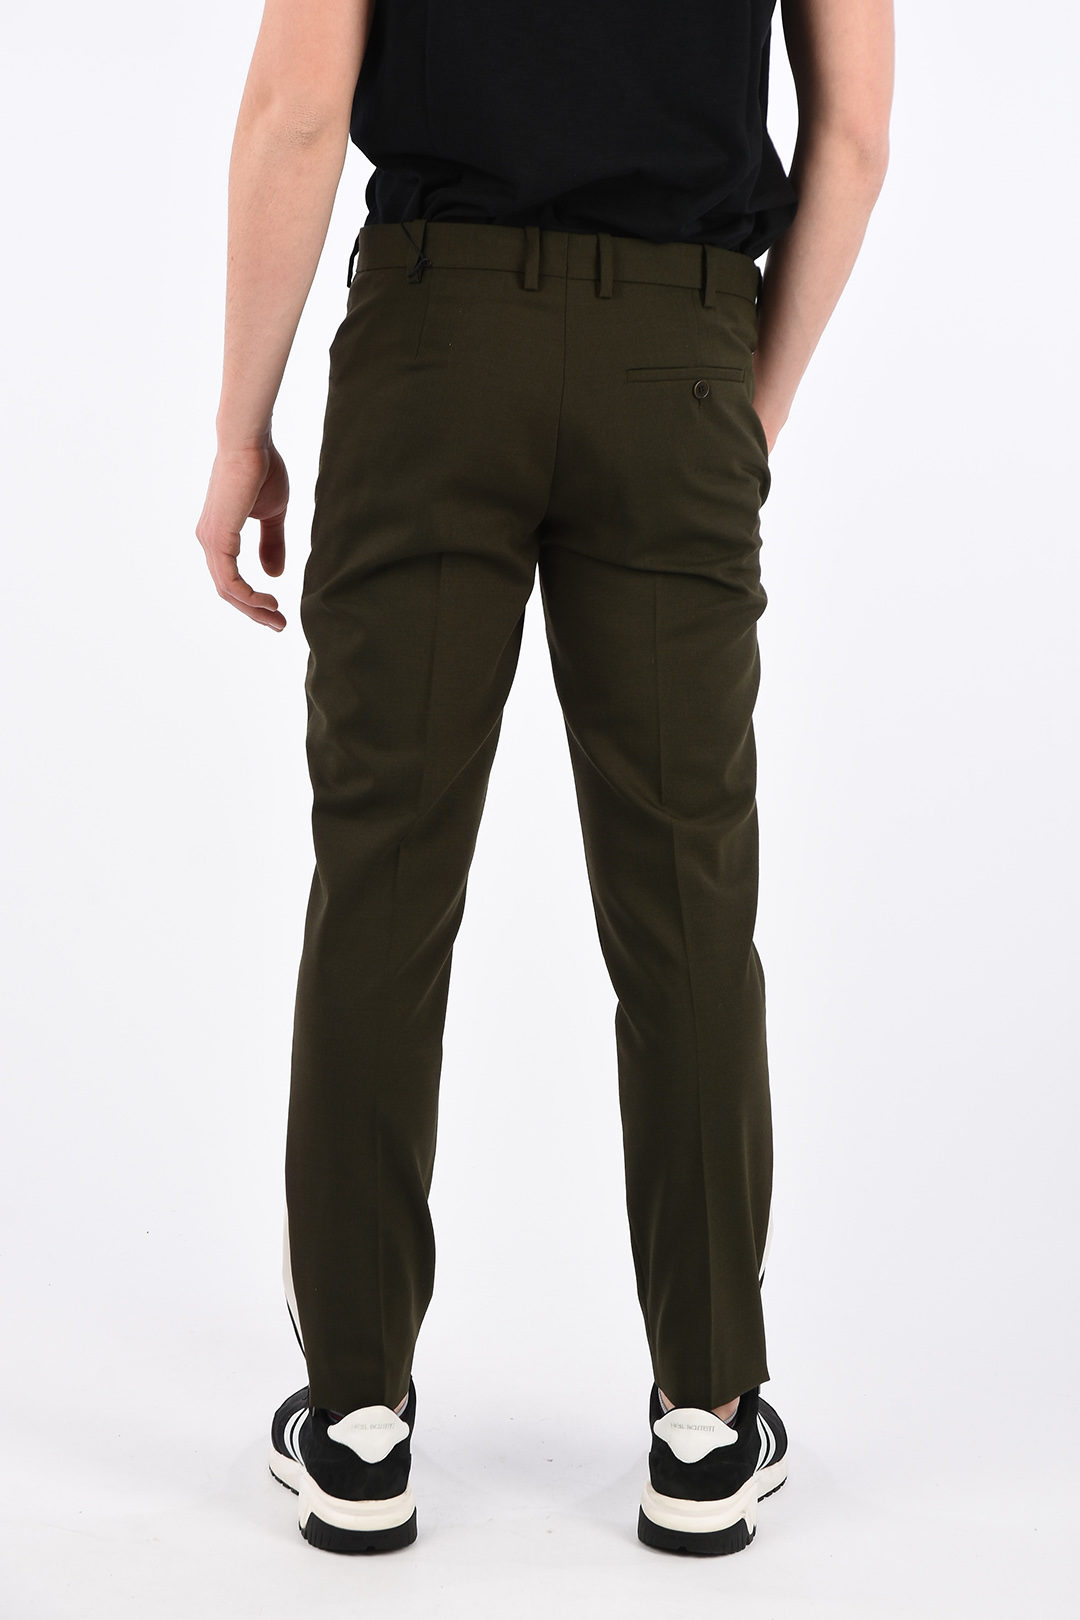 Neil Barrett Slim Fit Piping Pants with Ankle Zip men - Glamood Outlet